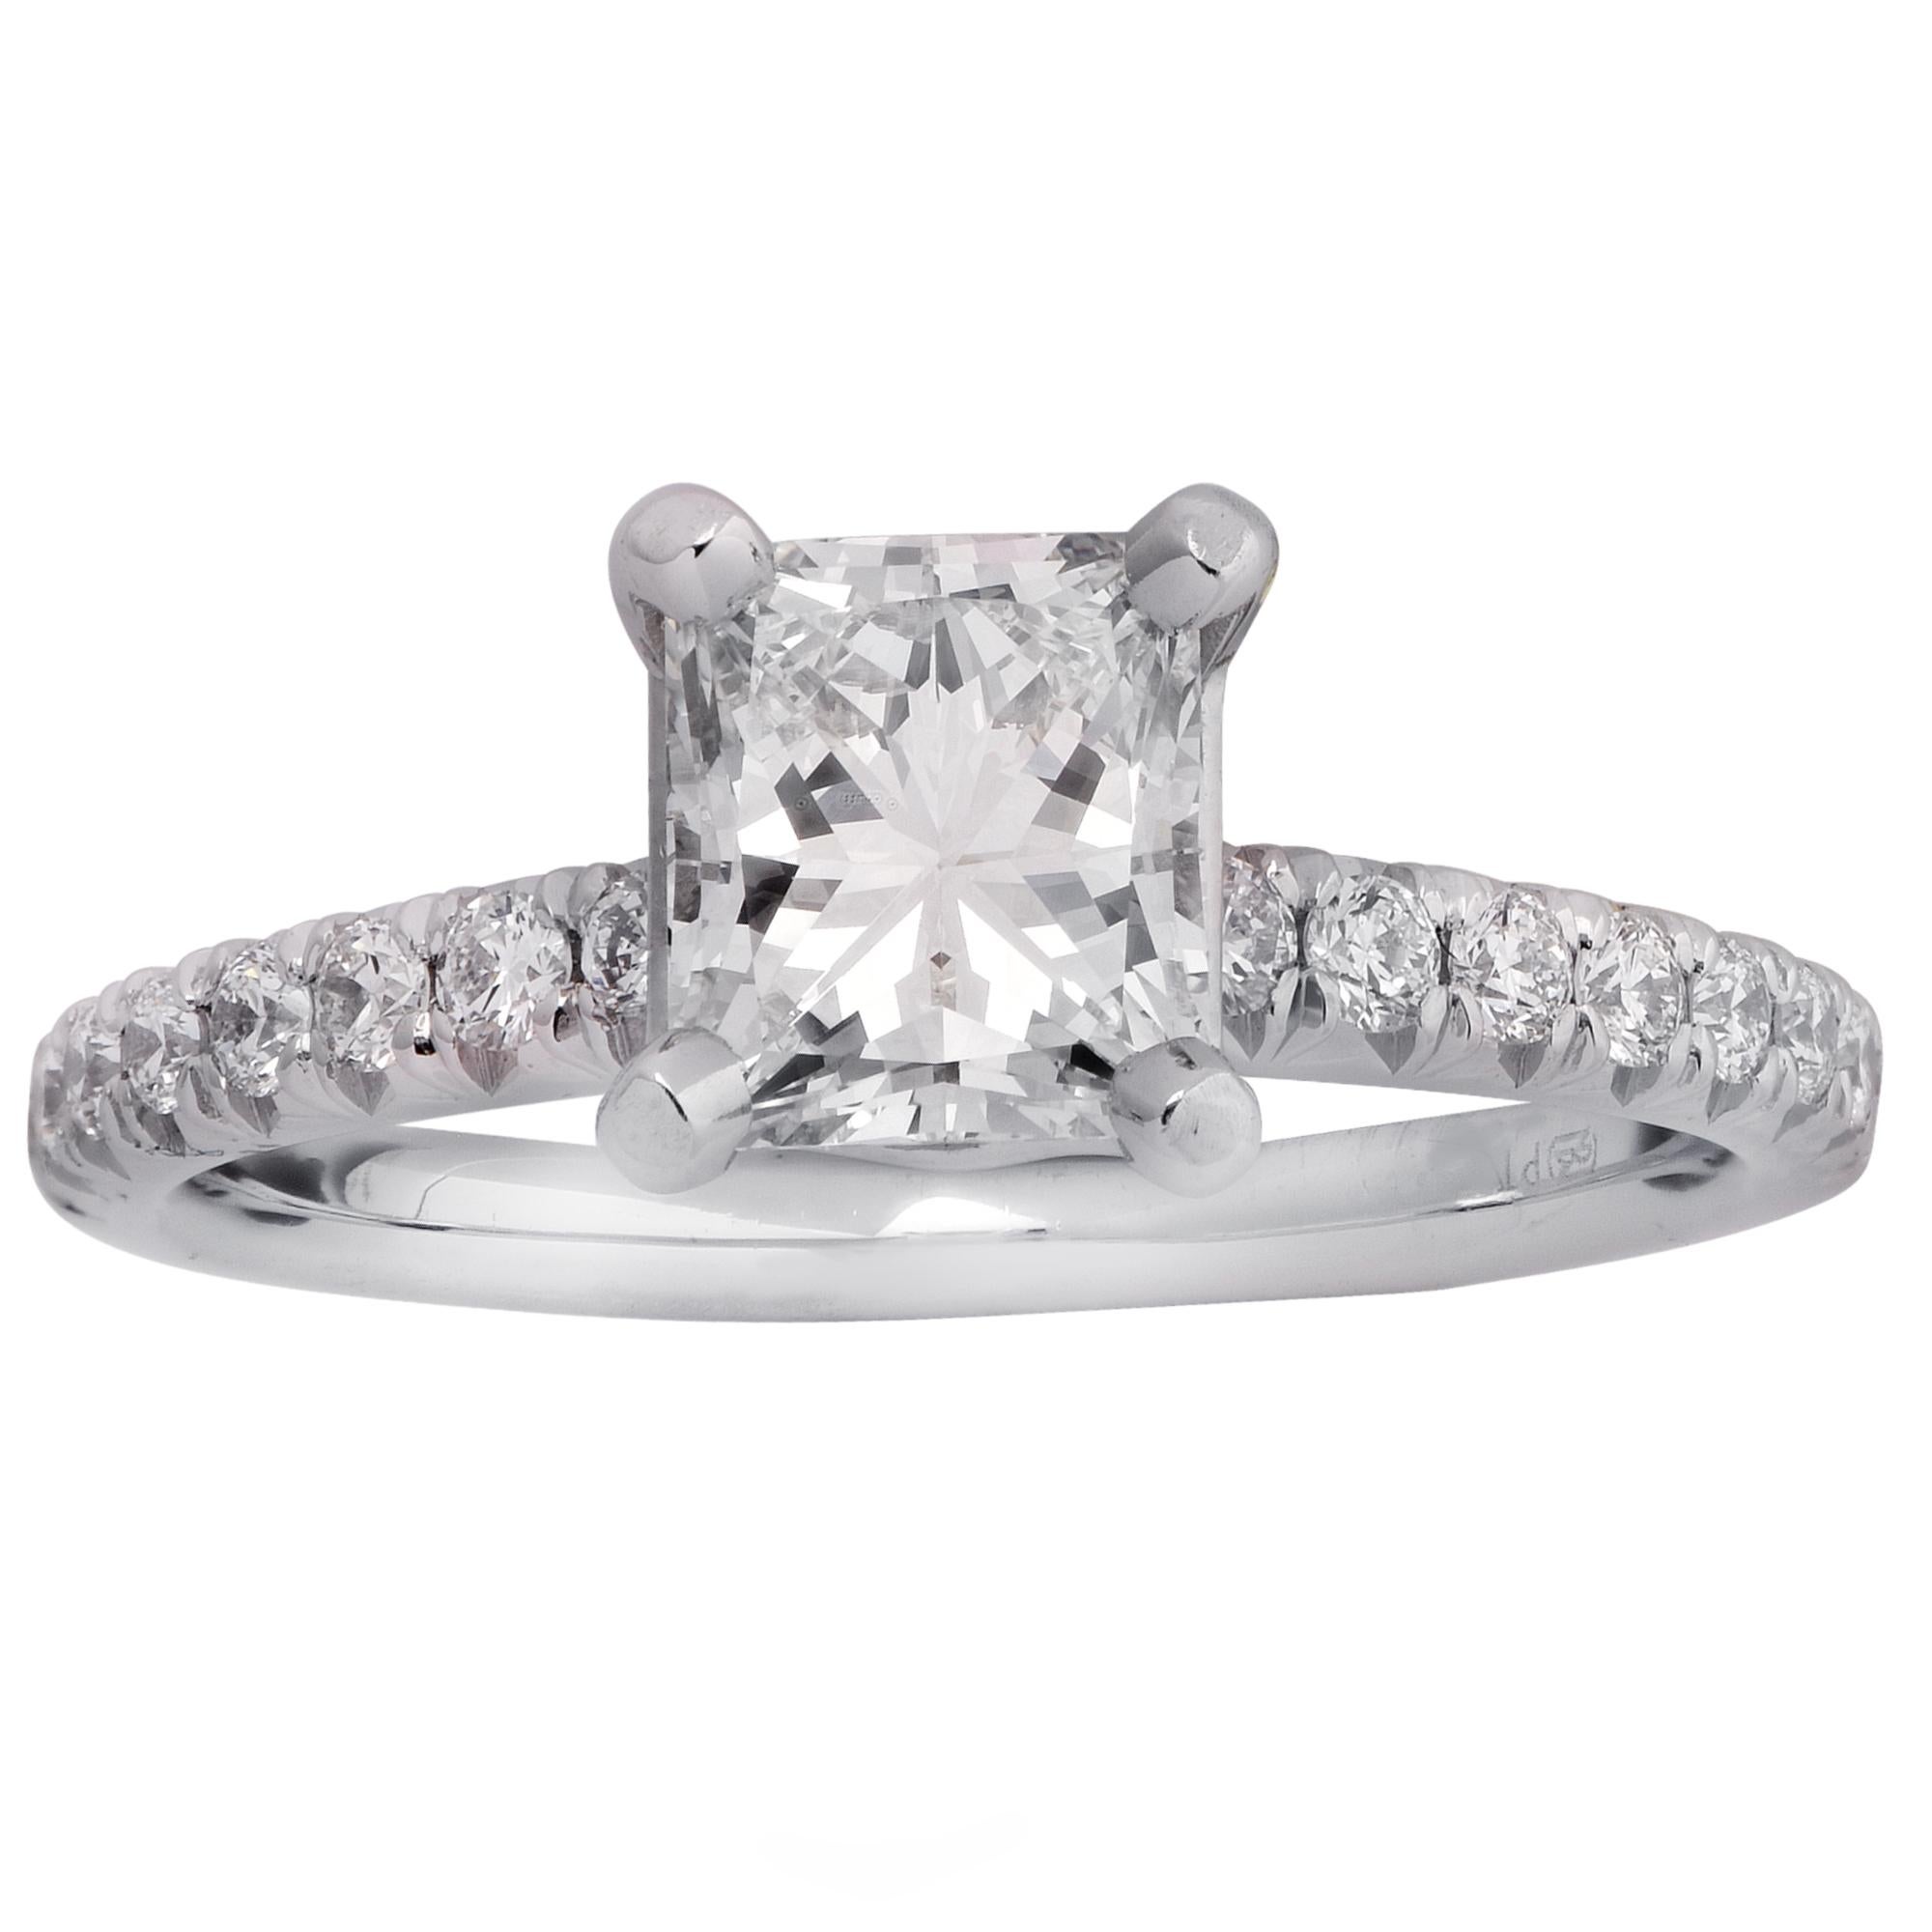 Elegant engagement ring crafted in platinum, featuring a GIA certified 1.07 carat princess cut diamond, J color VVS2 clarity, accented by 16 round brilliant cut diamonds weighing .25 carats total H color VS clarity. This stunning diamond rests on a